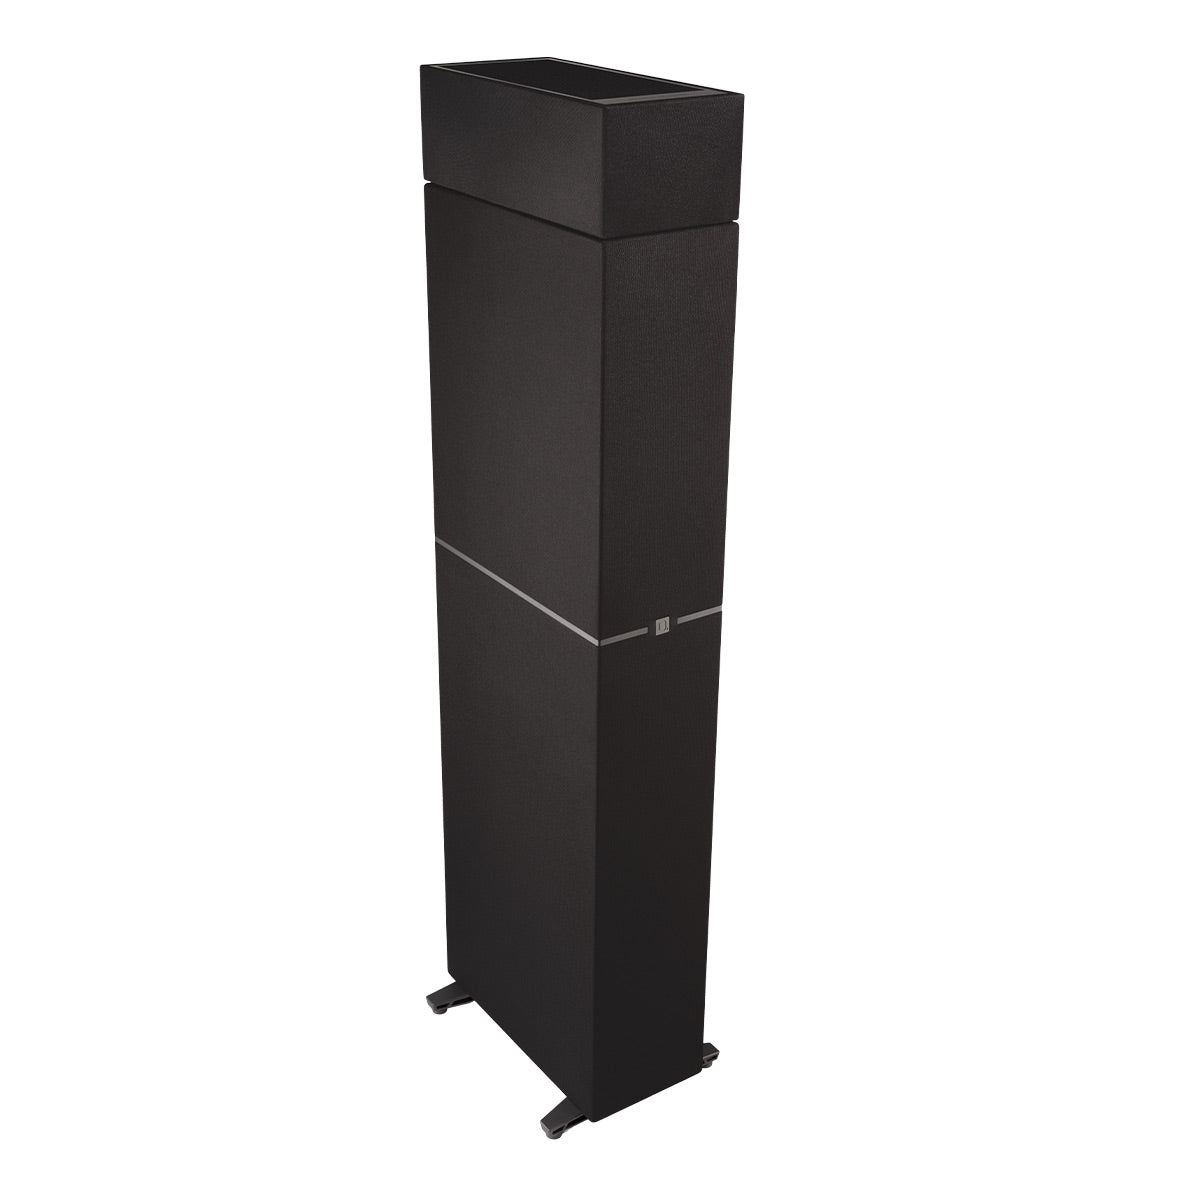 Definitive Technology Dymension DM90 Integrated Height Modules for DM80 and DM70 Speakers - Pair